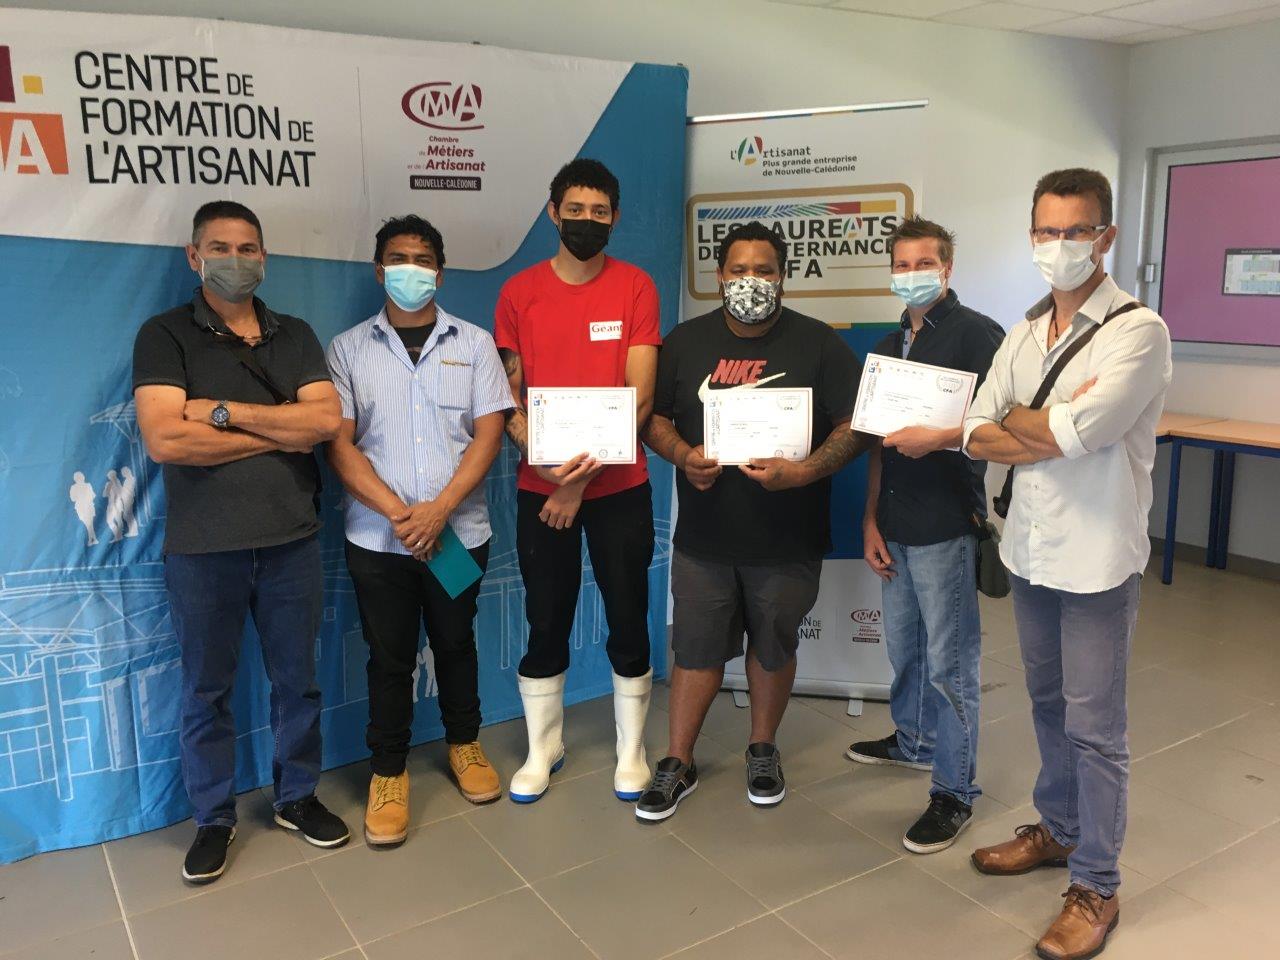 CAP butcher awards presented to four apprentices from Géant Dumbéa Mall and Géant Sainte-Marie hypermarkets